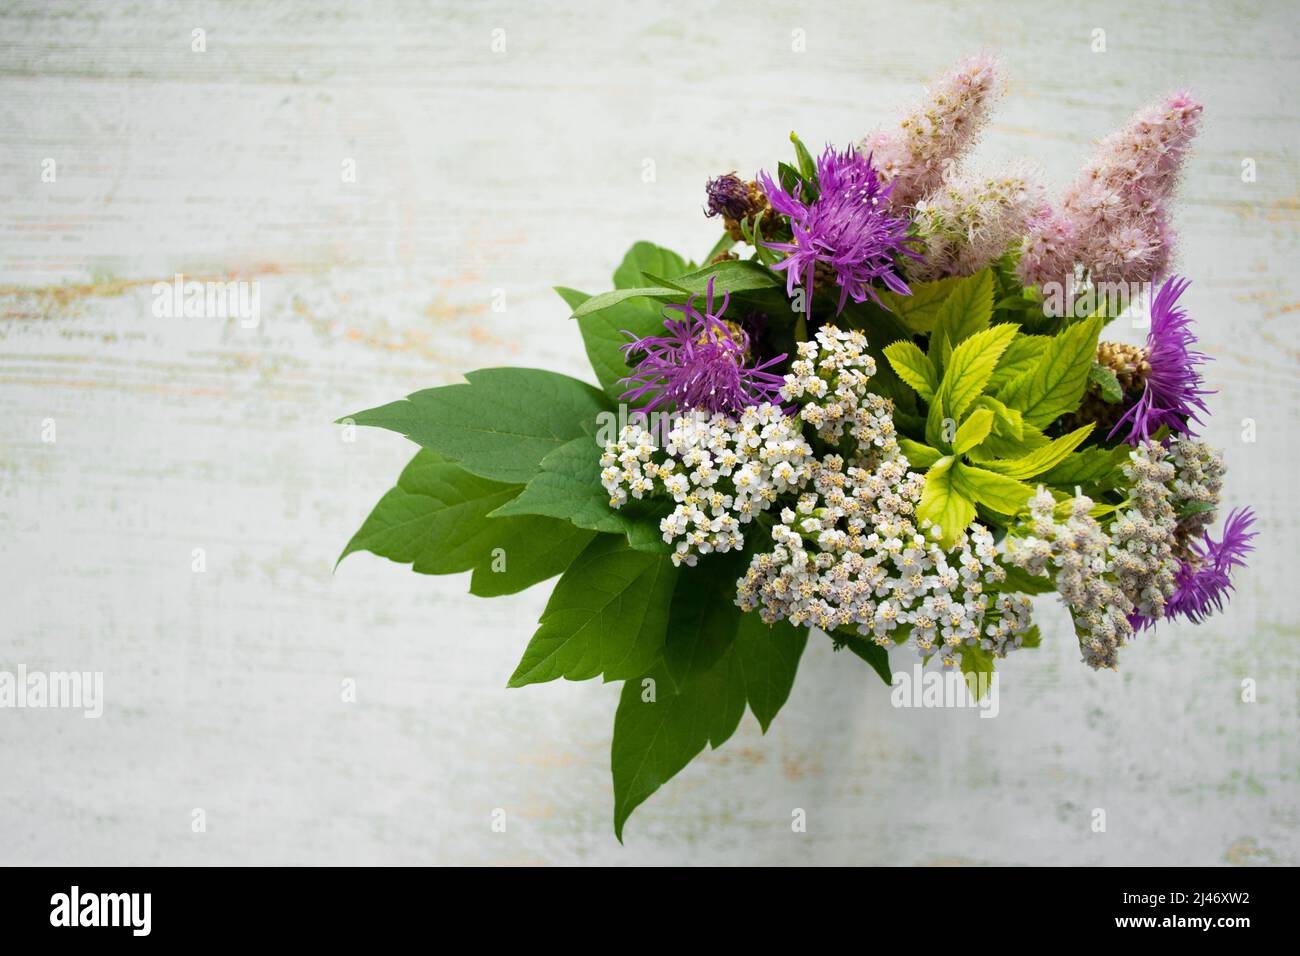 A bouquet of wild flowers on a wooden background. Rustic style. Copy space. Stock Photo